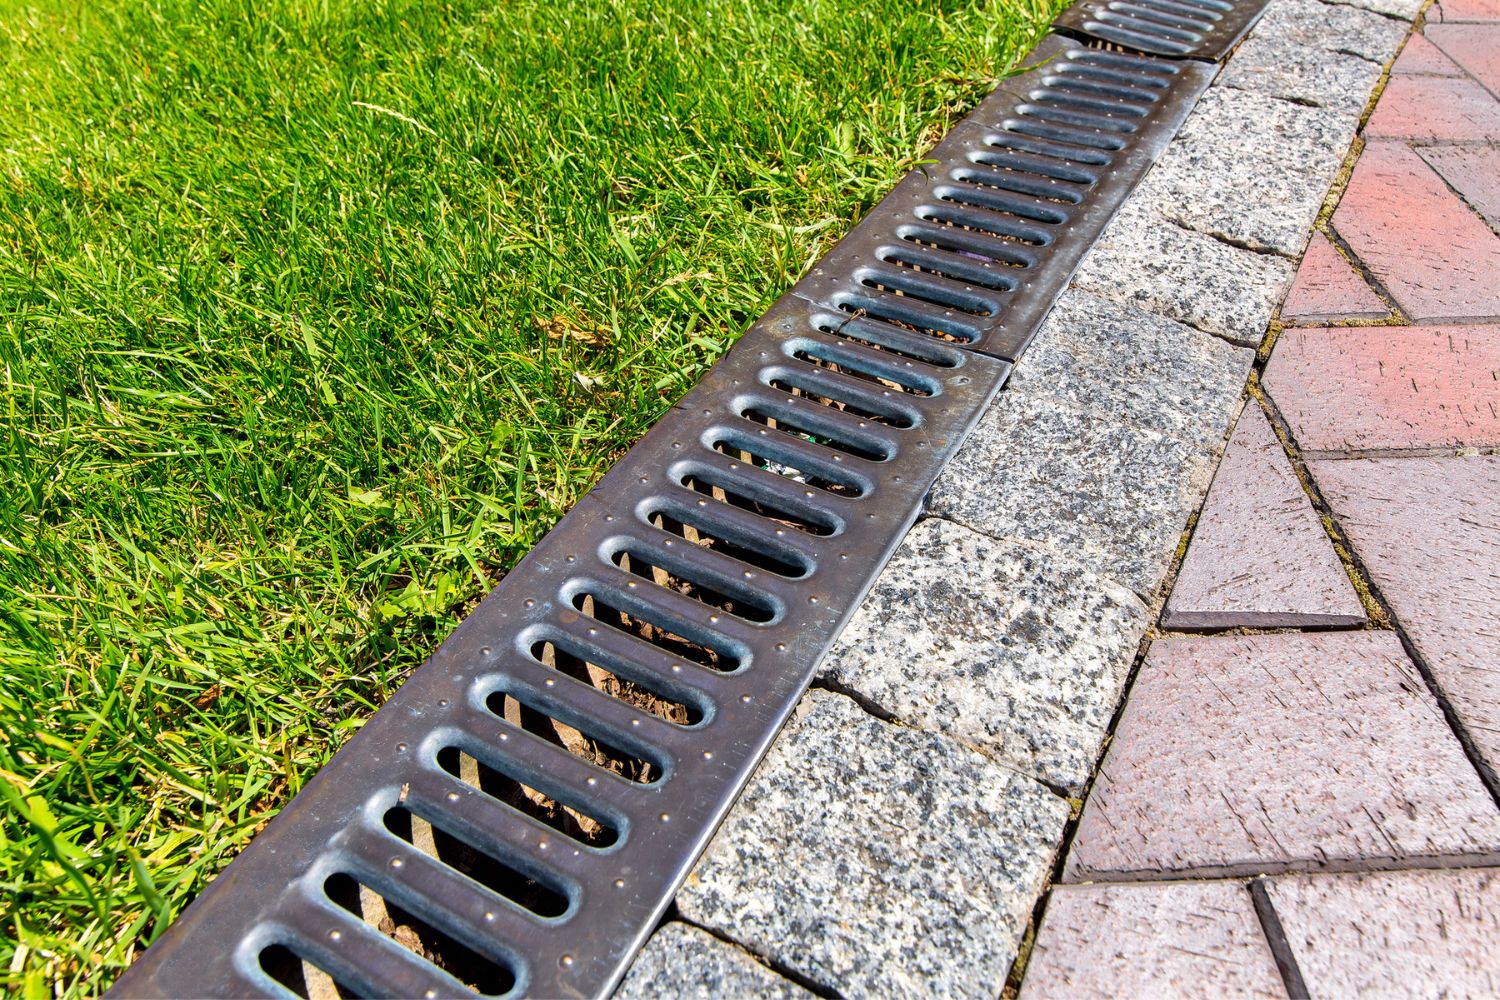 A close up of a drainage system lining a yard.